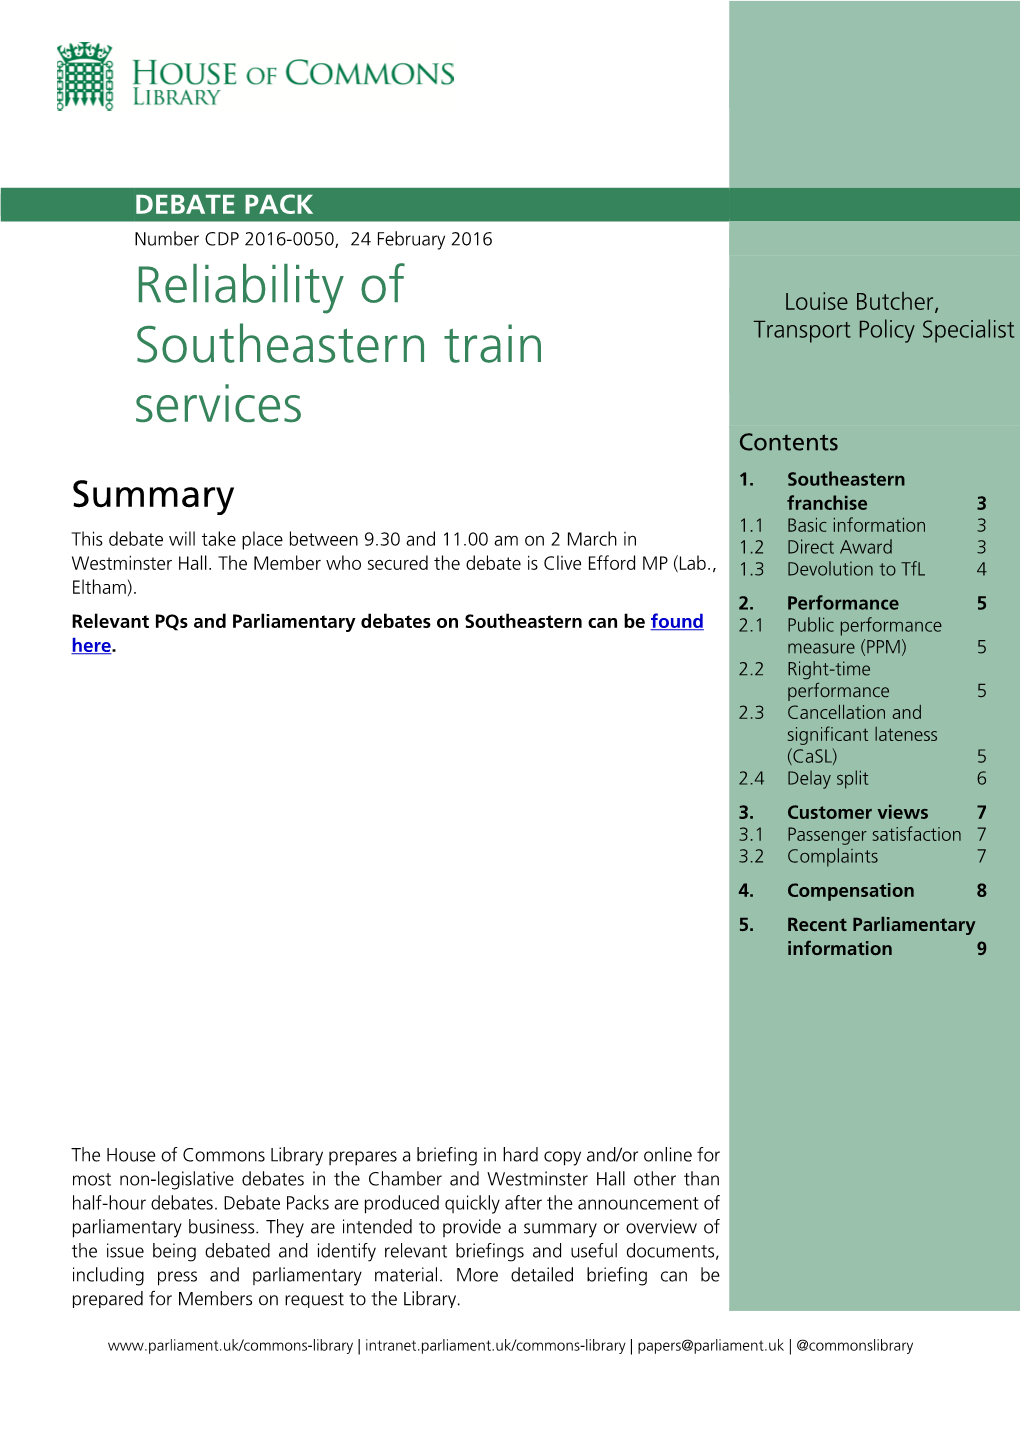 Reliability of Southeastern Train Services 3